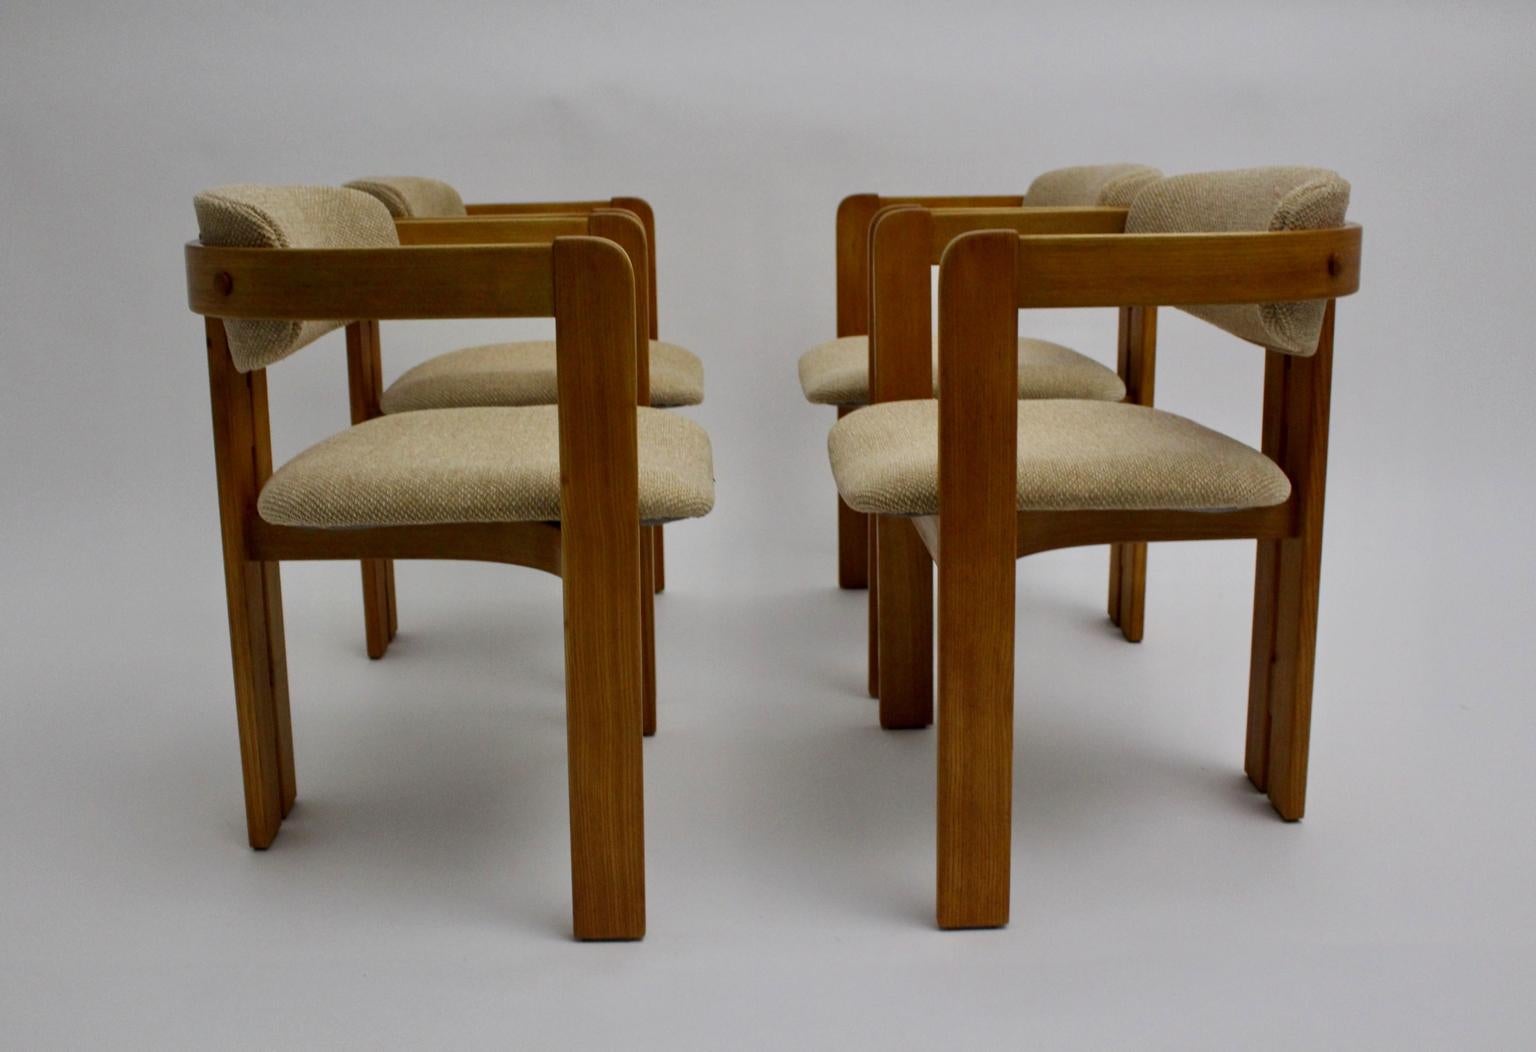 A vintage set four Italian vintage brown ash dining chairs, which was designed and executed 1970s.
The colorless lacquered wooden frame of the armchairs were made of ash wood and shows a beautiful warm brown tone, while seat and the back are